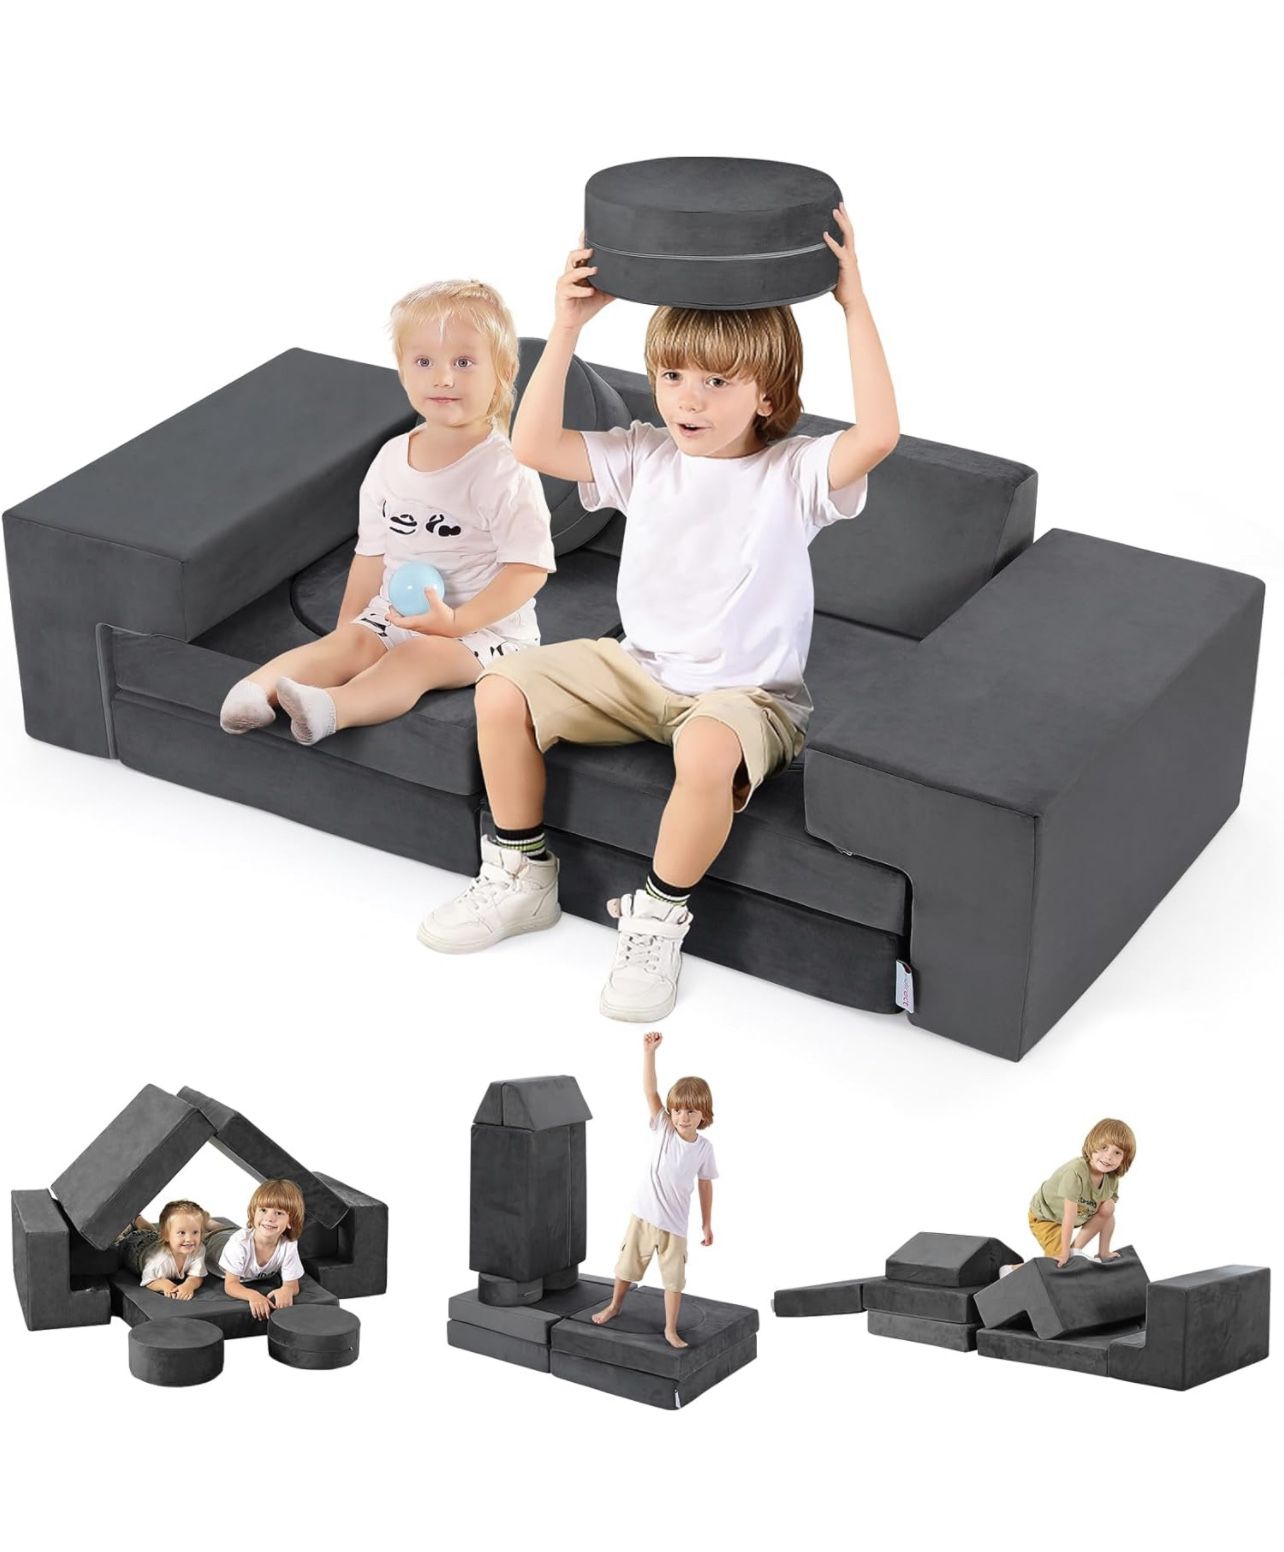  New 11pcs Modular Kids Play Couch, Kids Couch Building Fort